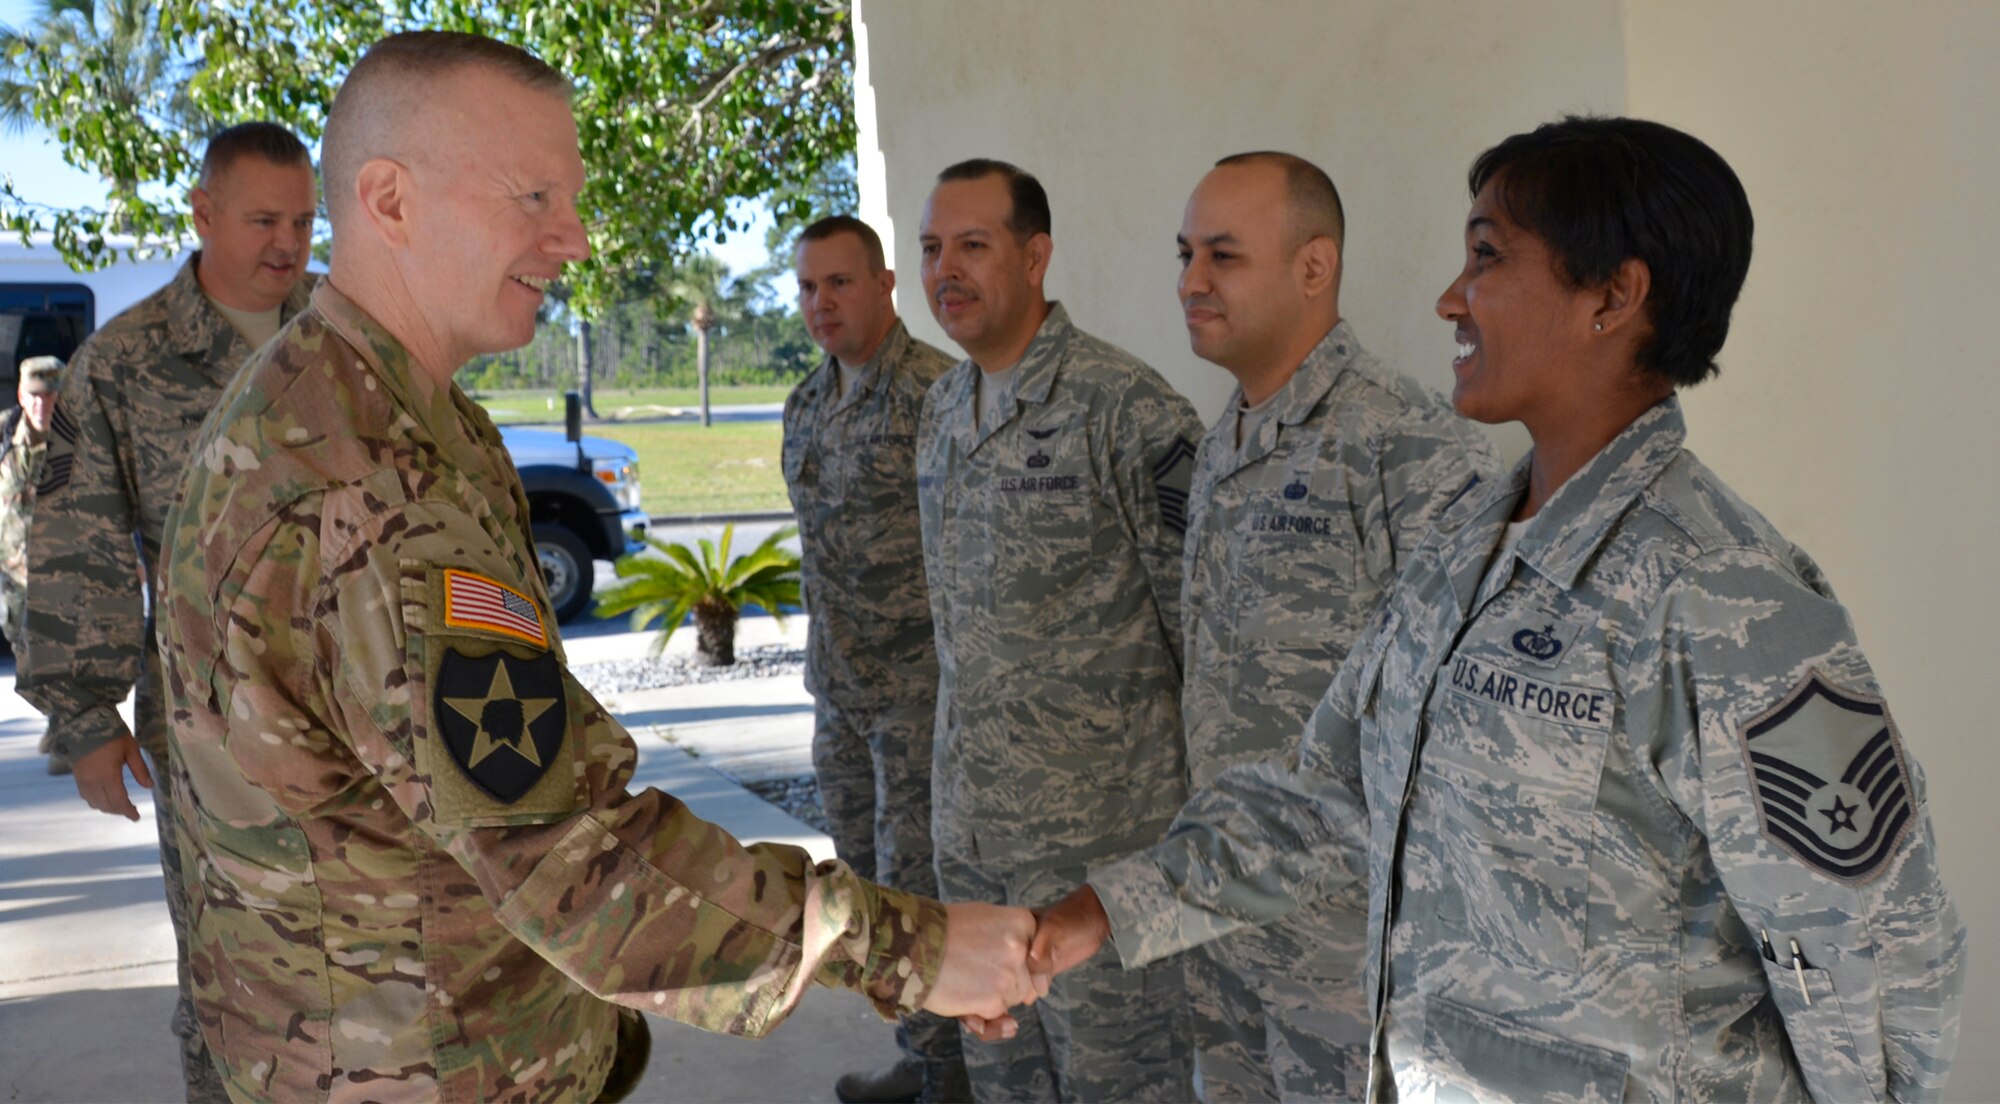 U.S. Army Command Sgt. Maj. John Wayne Troxell, Senior Enlisted Advisor to the Chairman of the Joint Chiefs of Staff and Secretary of Defense, greets Master Sgt. Erika Williams, 601st Air Operations Center Plans Division, upon arrival to an Air Forces Northern professional military development event here. Troxell was visiting as the keynote speaker for “Technical Sergeants Involved & Mentoring Enlisted Airmen,” April 24. During his remarks, Troxell, also the senior noncommissioned officer in the U.S. Armed Forces, encouraged TIME participants to develop into leaders who strive daily to set the example for subordinates by demonstrating selfless dedication to established military standards. (Air Force photo by Mary McHale)